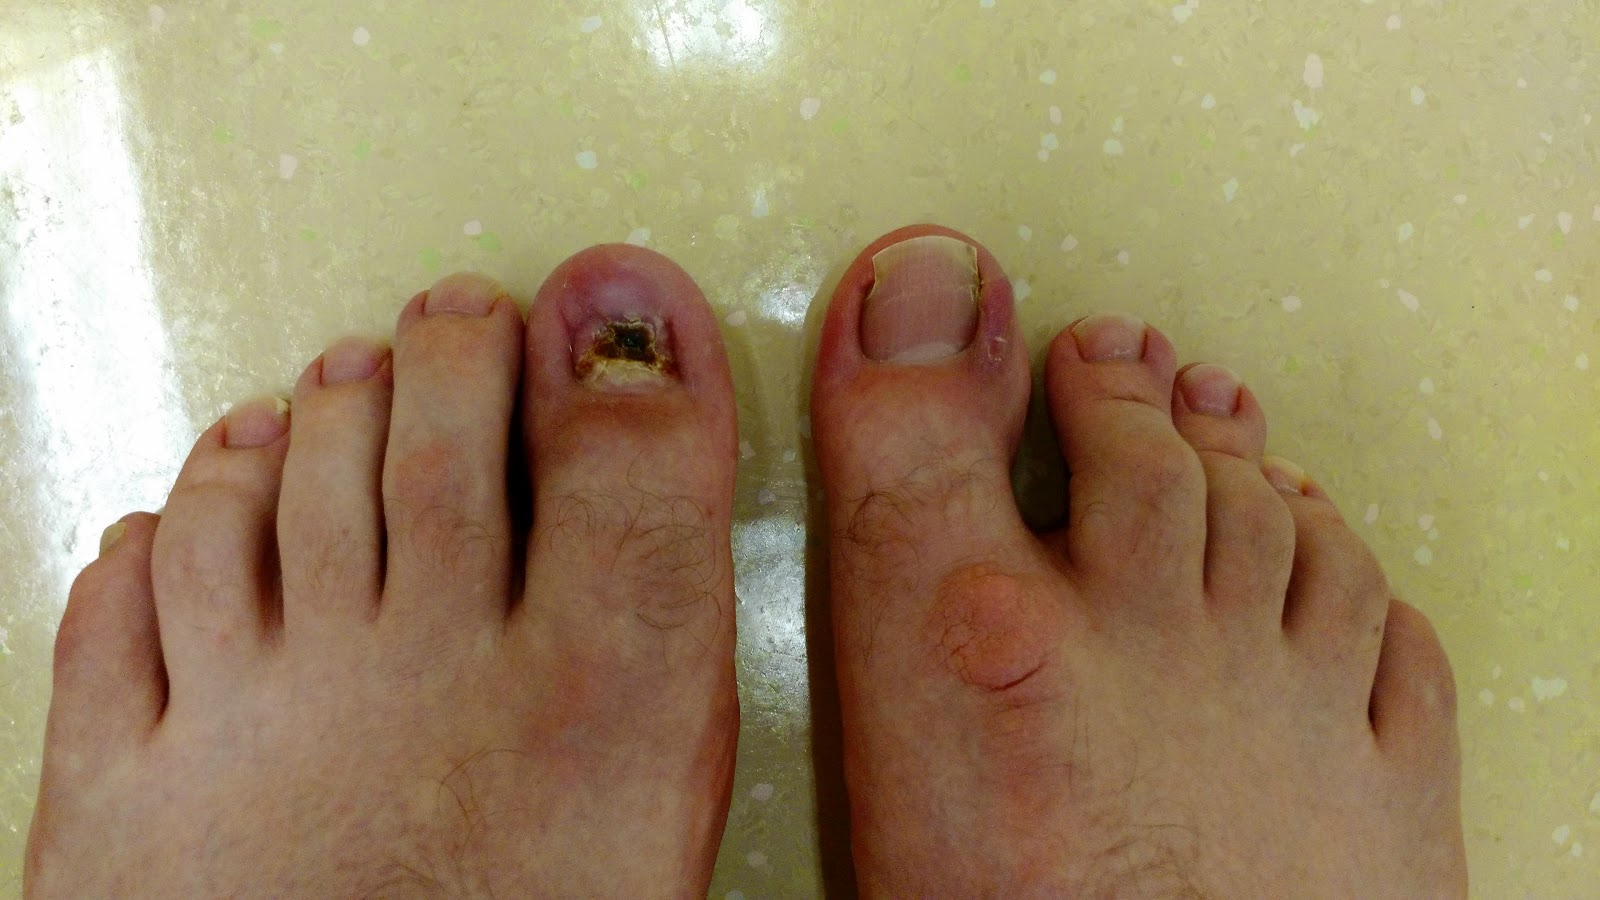 Bees' Nest Getting my *Other* Ingrown Toenail Removed